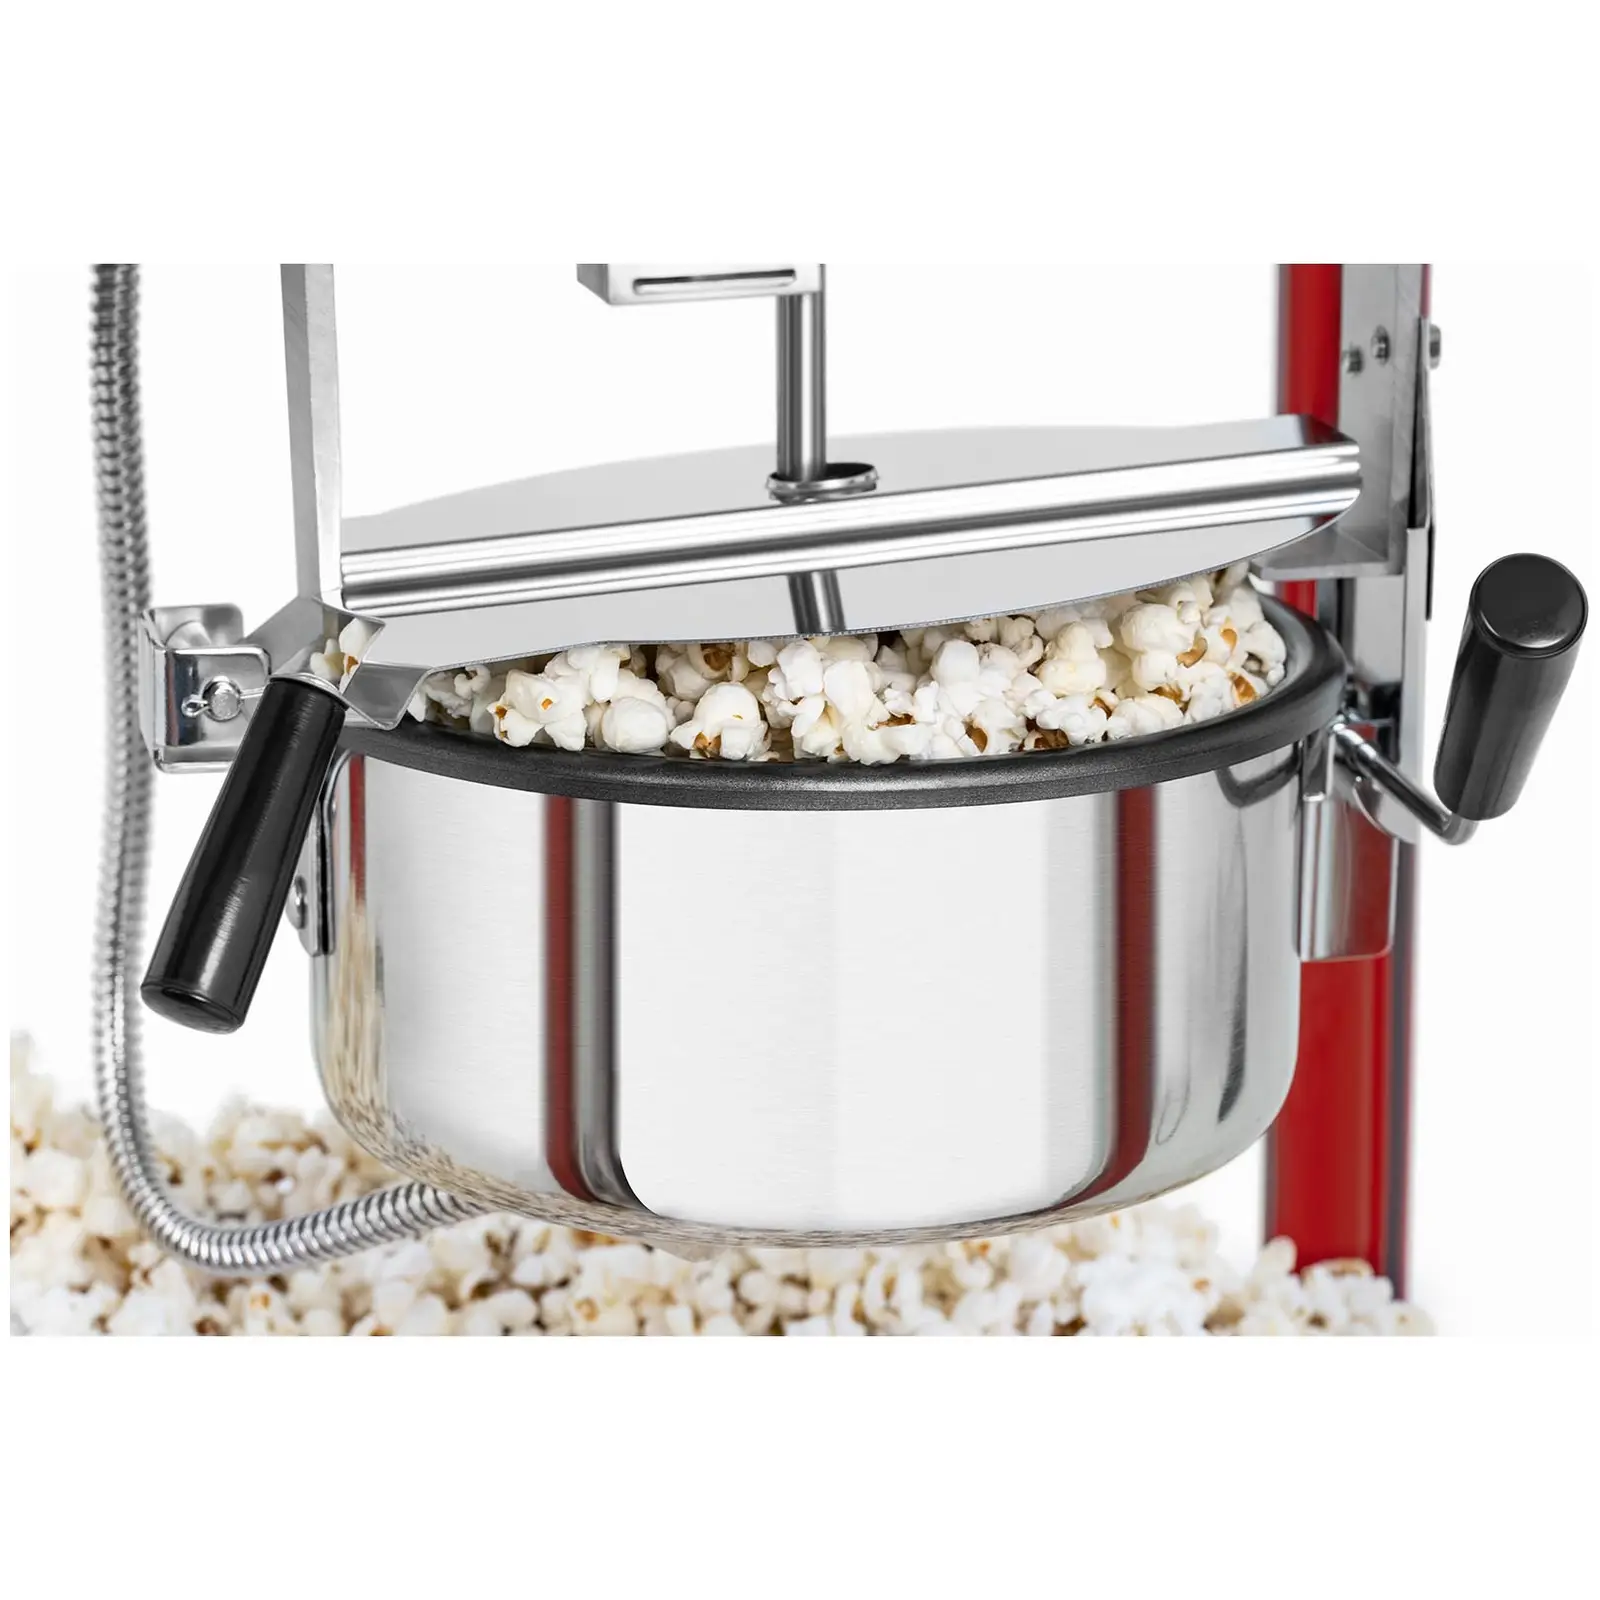 Popcorn machine - red - 1600W - stainless steel - tempered glass - Teflon